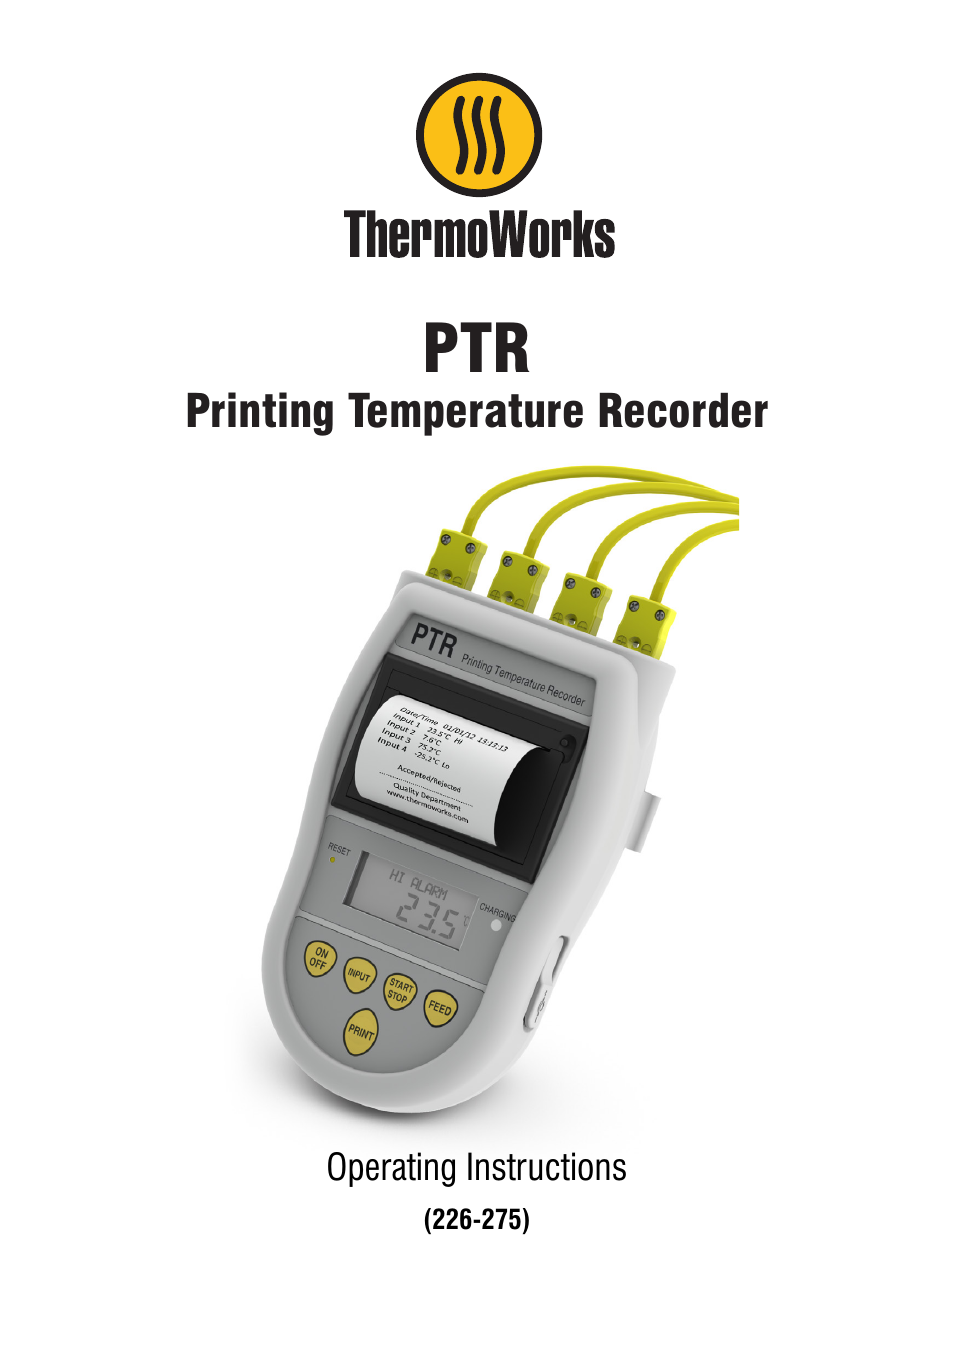 226-275 4-CHANNEL PRINTING TEMPERATURE RECORDER - PTR Quick Start Guide